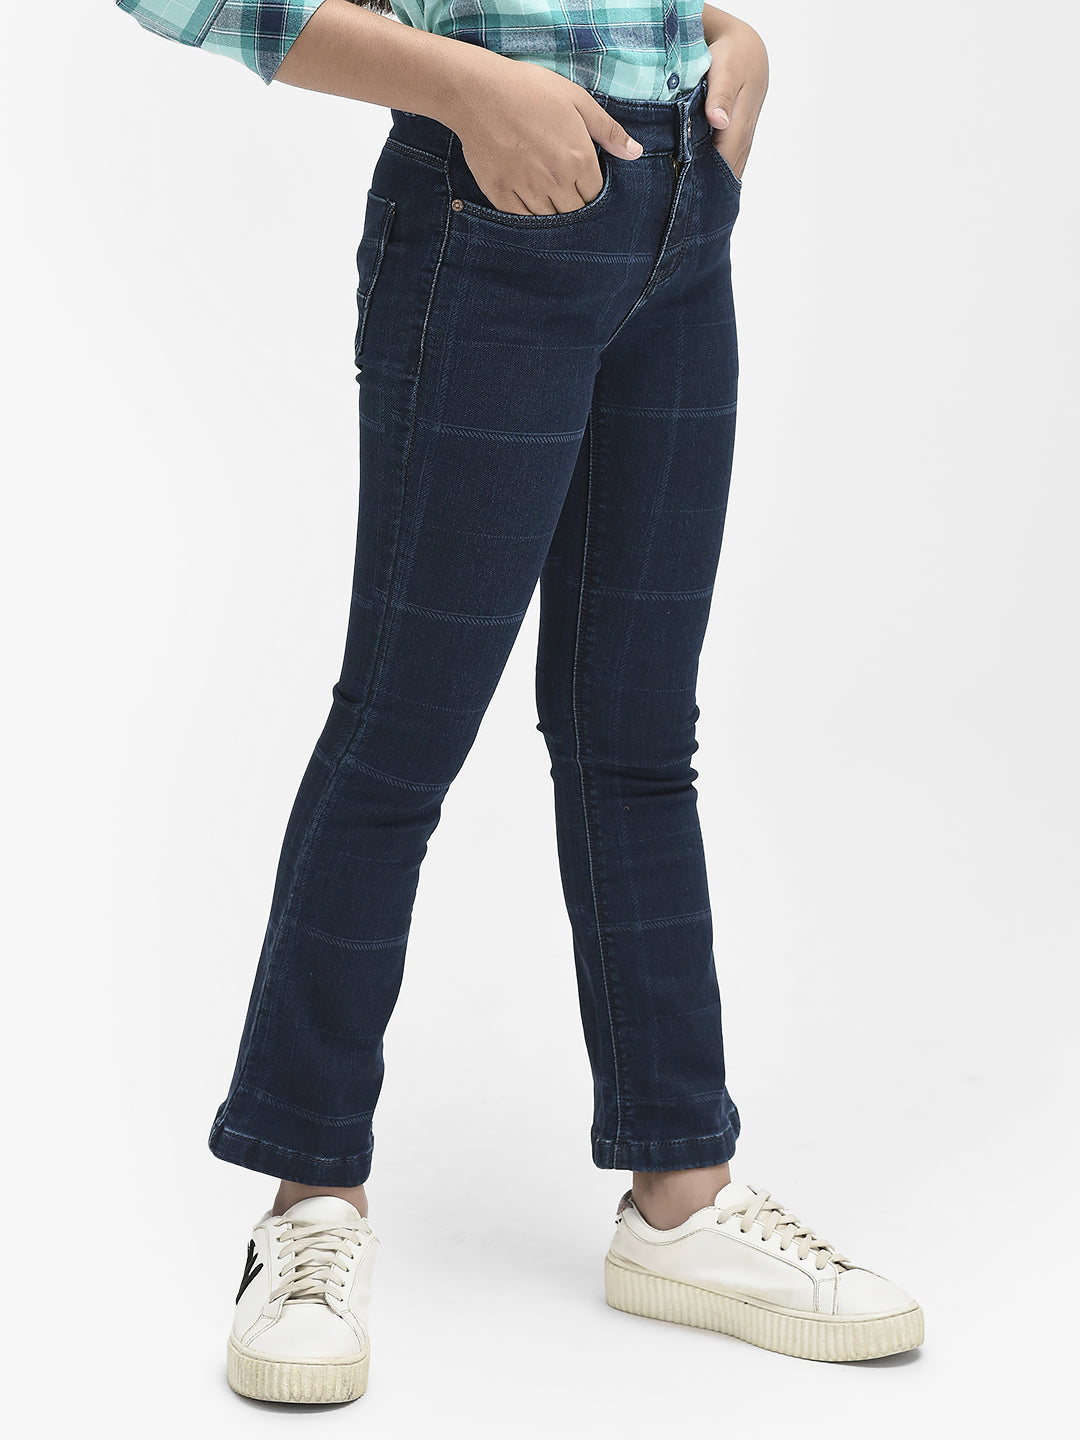  Navy Blue Bootcut Jeans